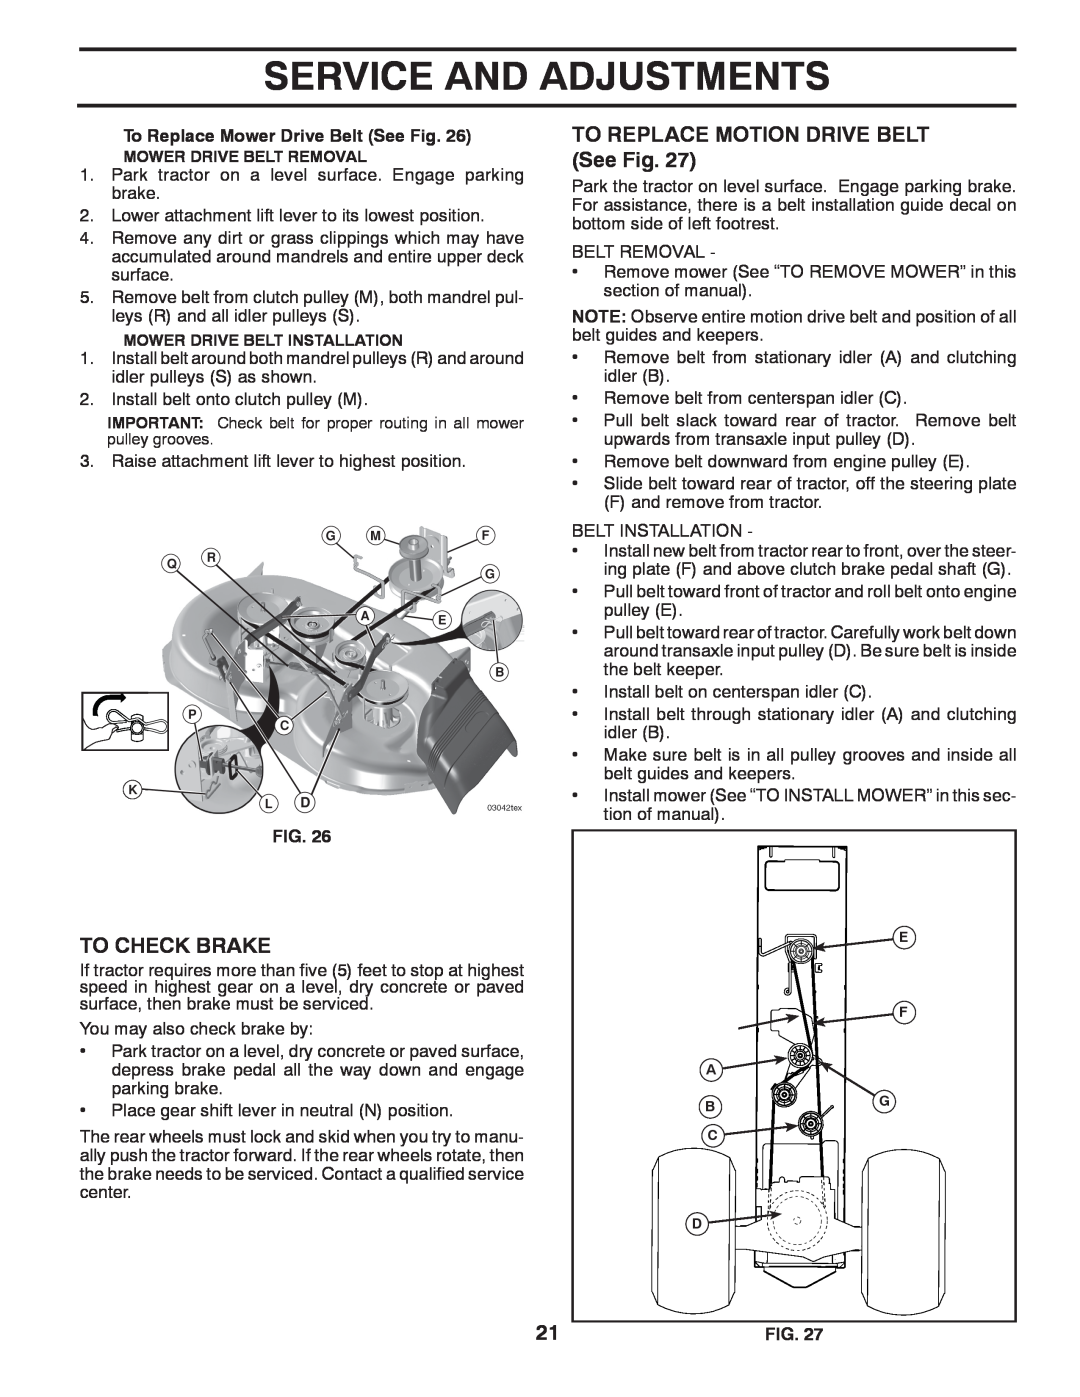 Husqvarna LT1597 manual To Check Brake, TO REPLACE MOTION DRIVE BELT See Fig, Service And Adjustments 